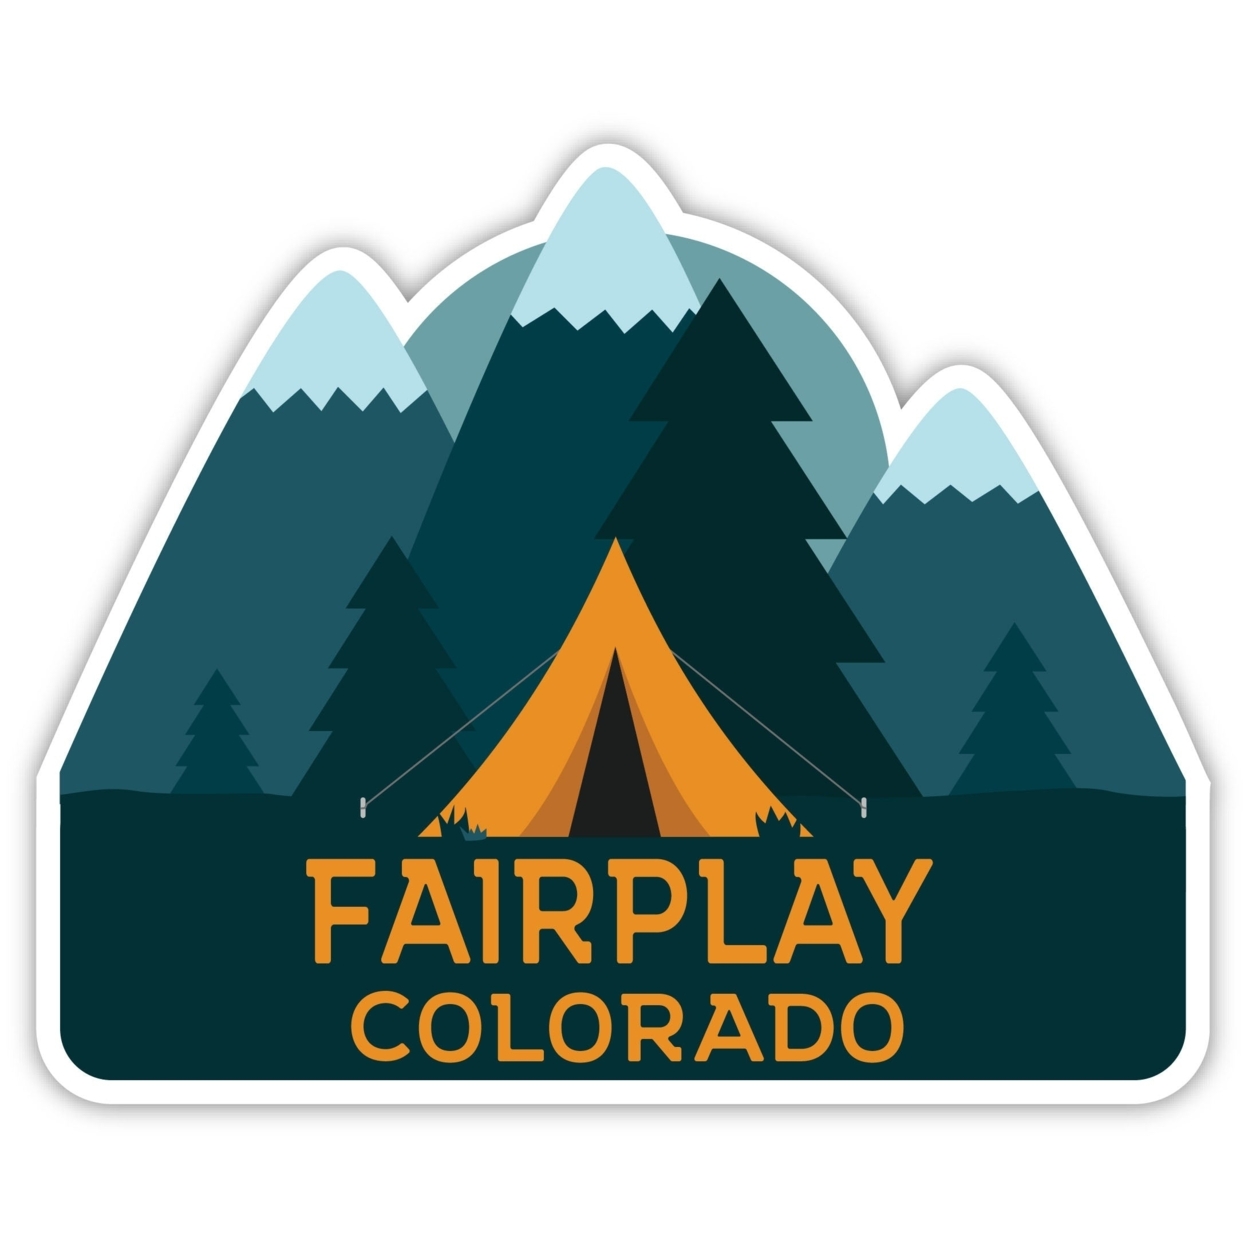 Fairplay Colorado Souvenir Decorative Stickers (Choose Theme And Size) - 4-Pack, 2-Inch, Adventures Awaits